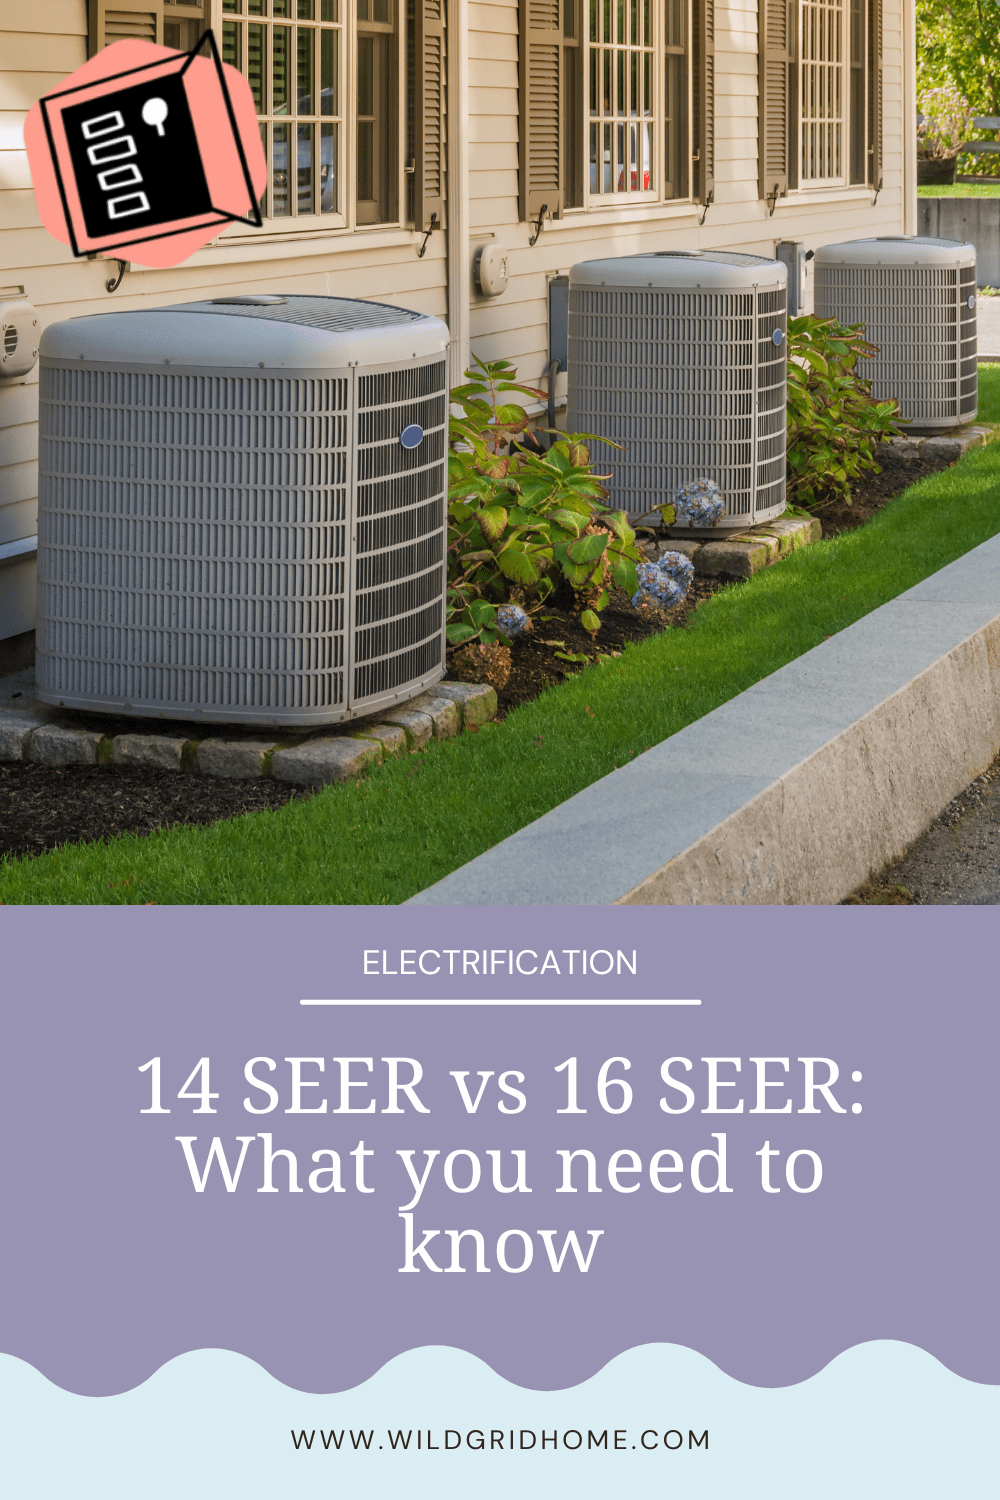 14 SEER vs 16 SEER: What you need to know - Wildgrid Home